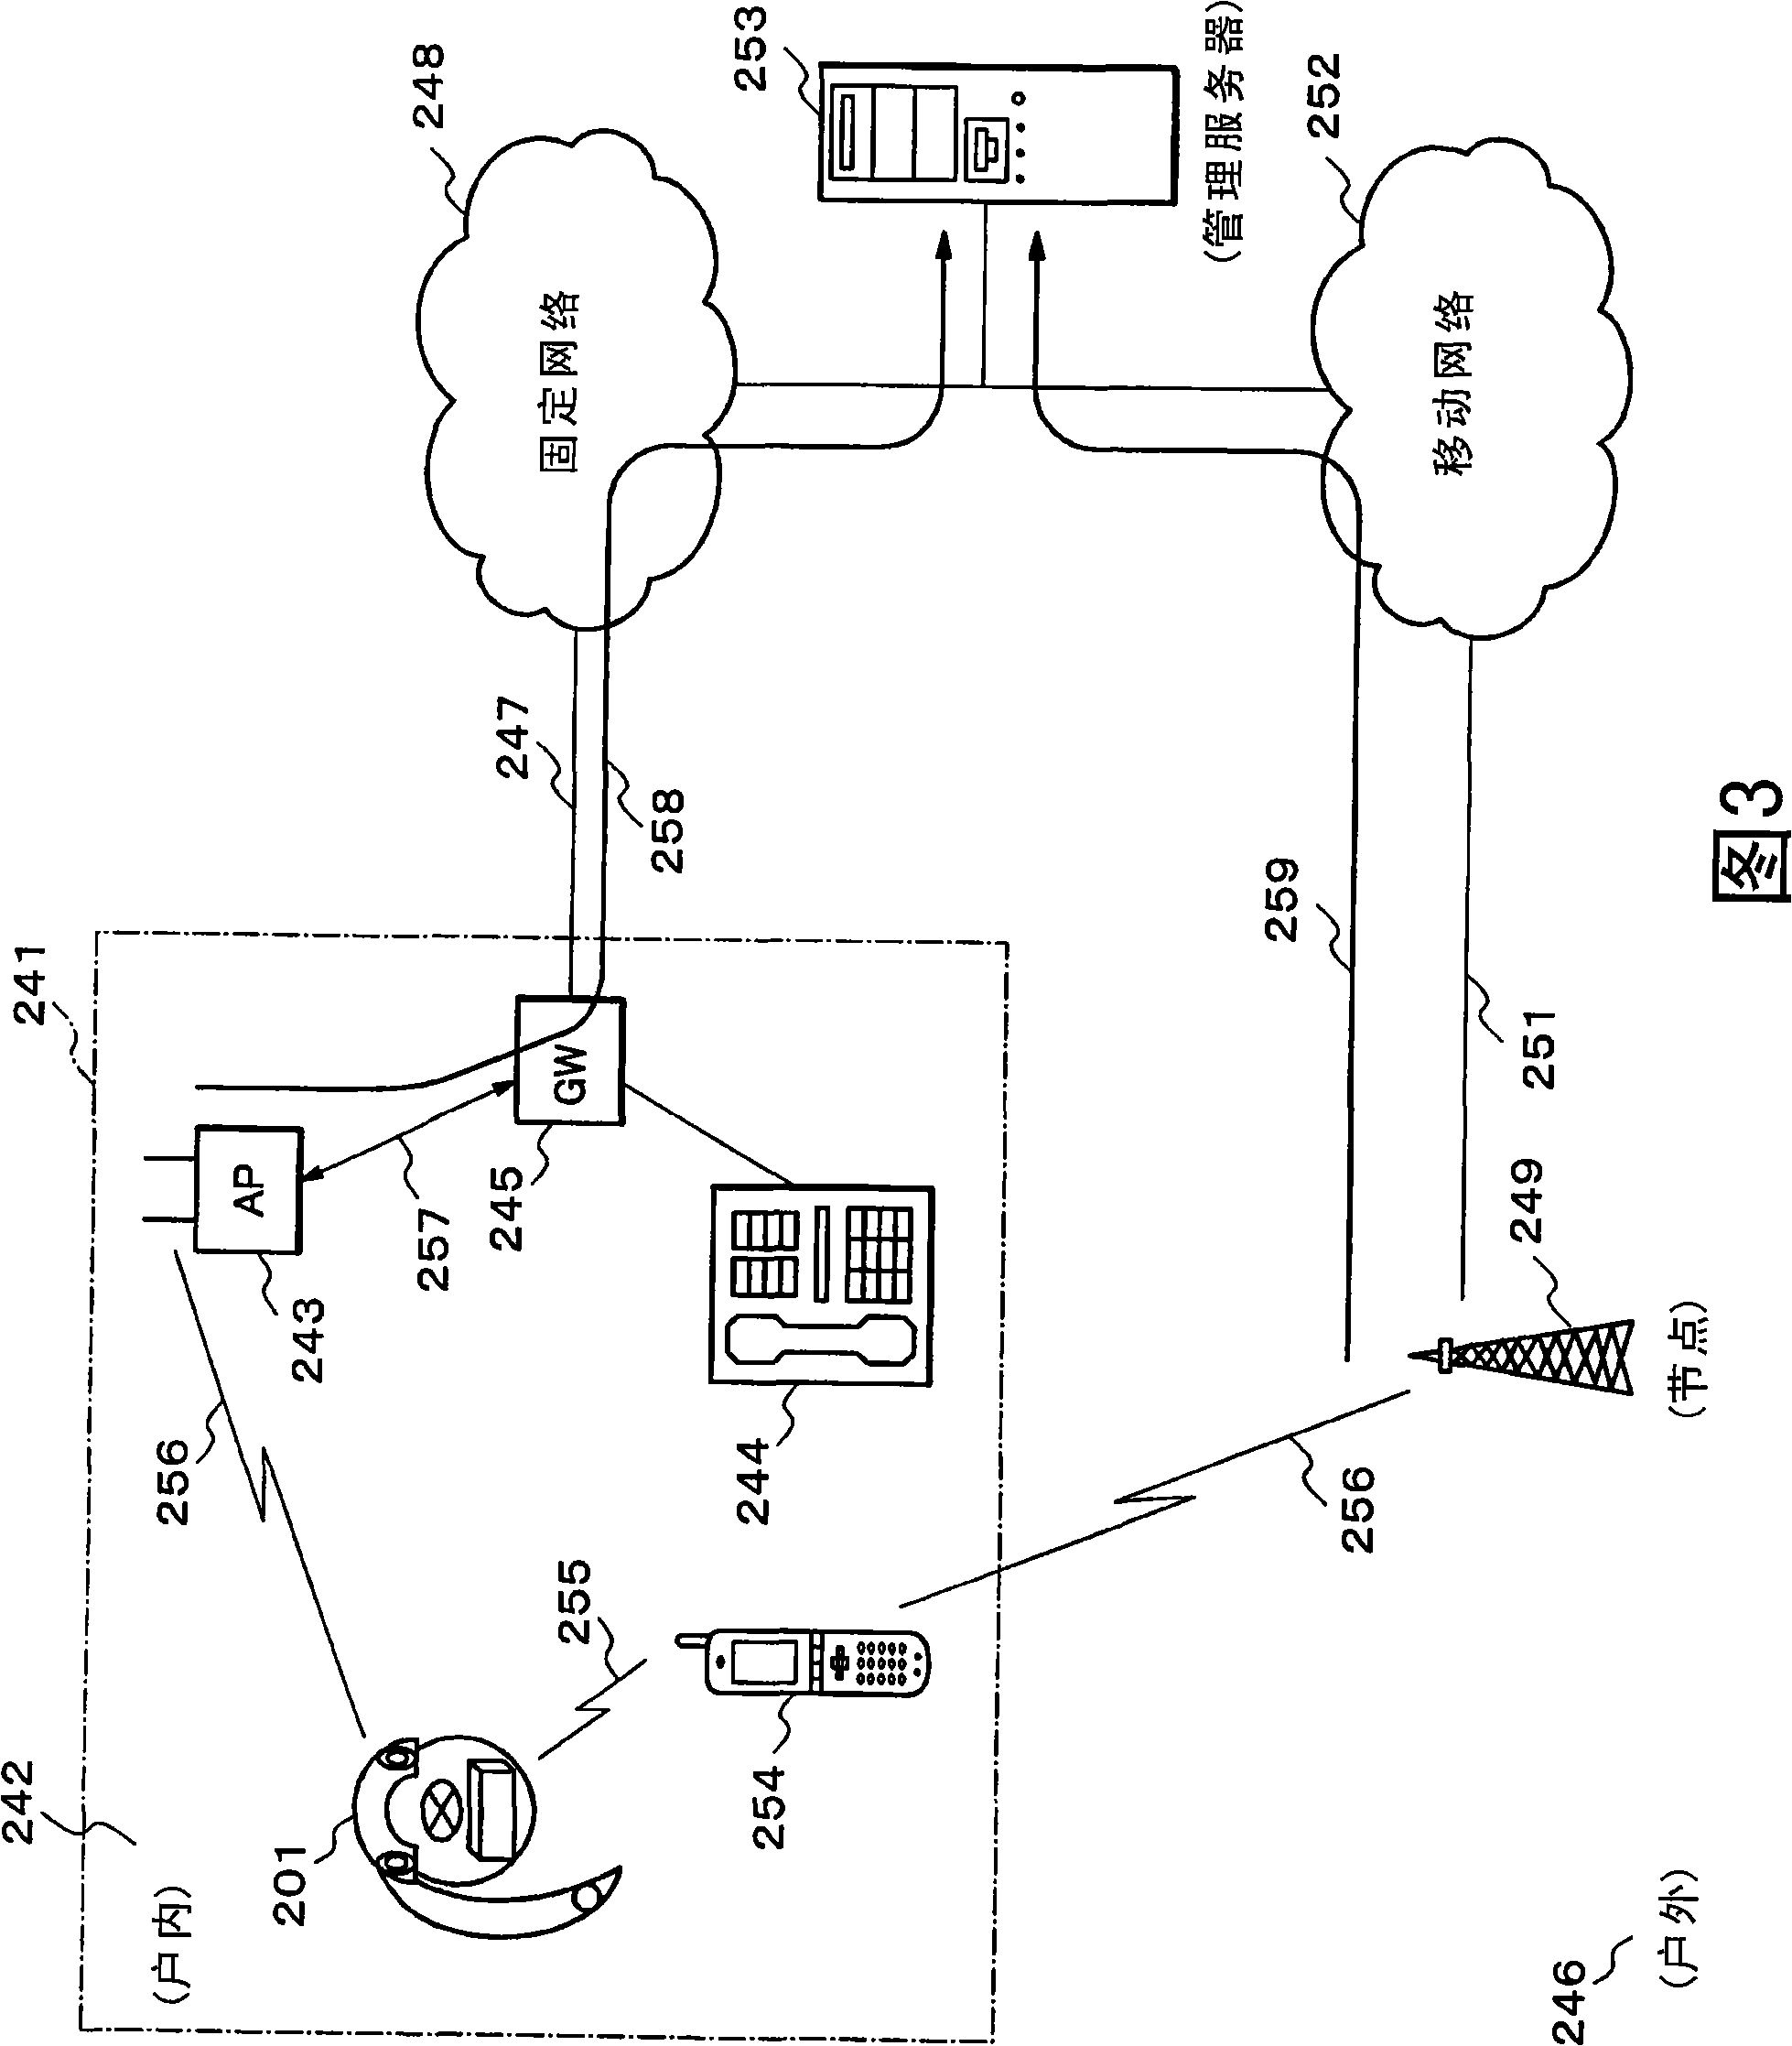 Wireless headset, portable communication system, and method for placing a call from a headset